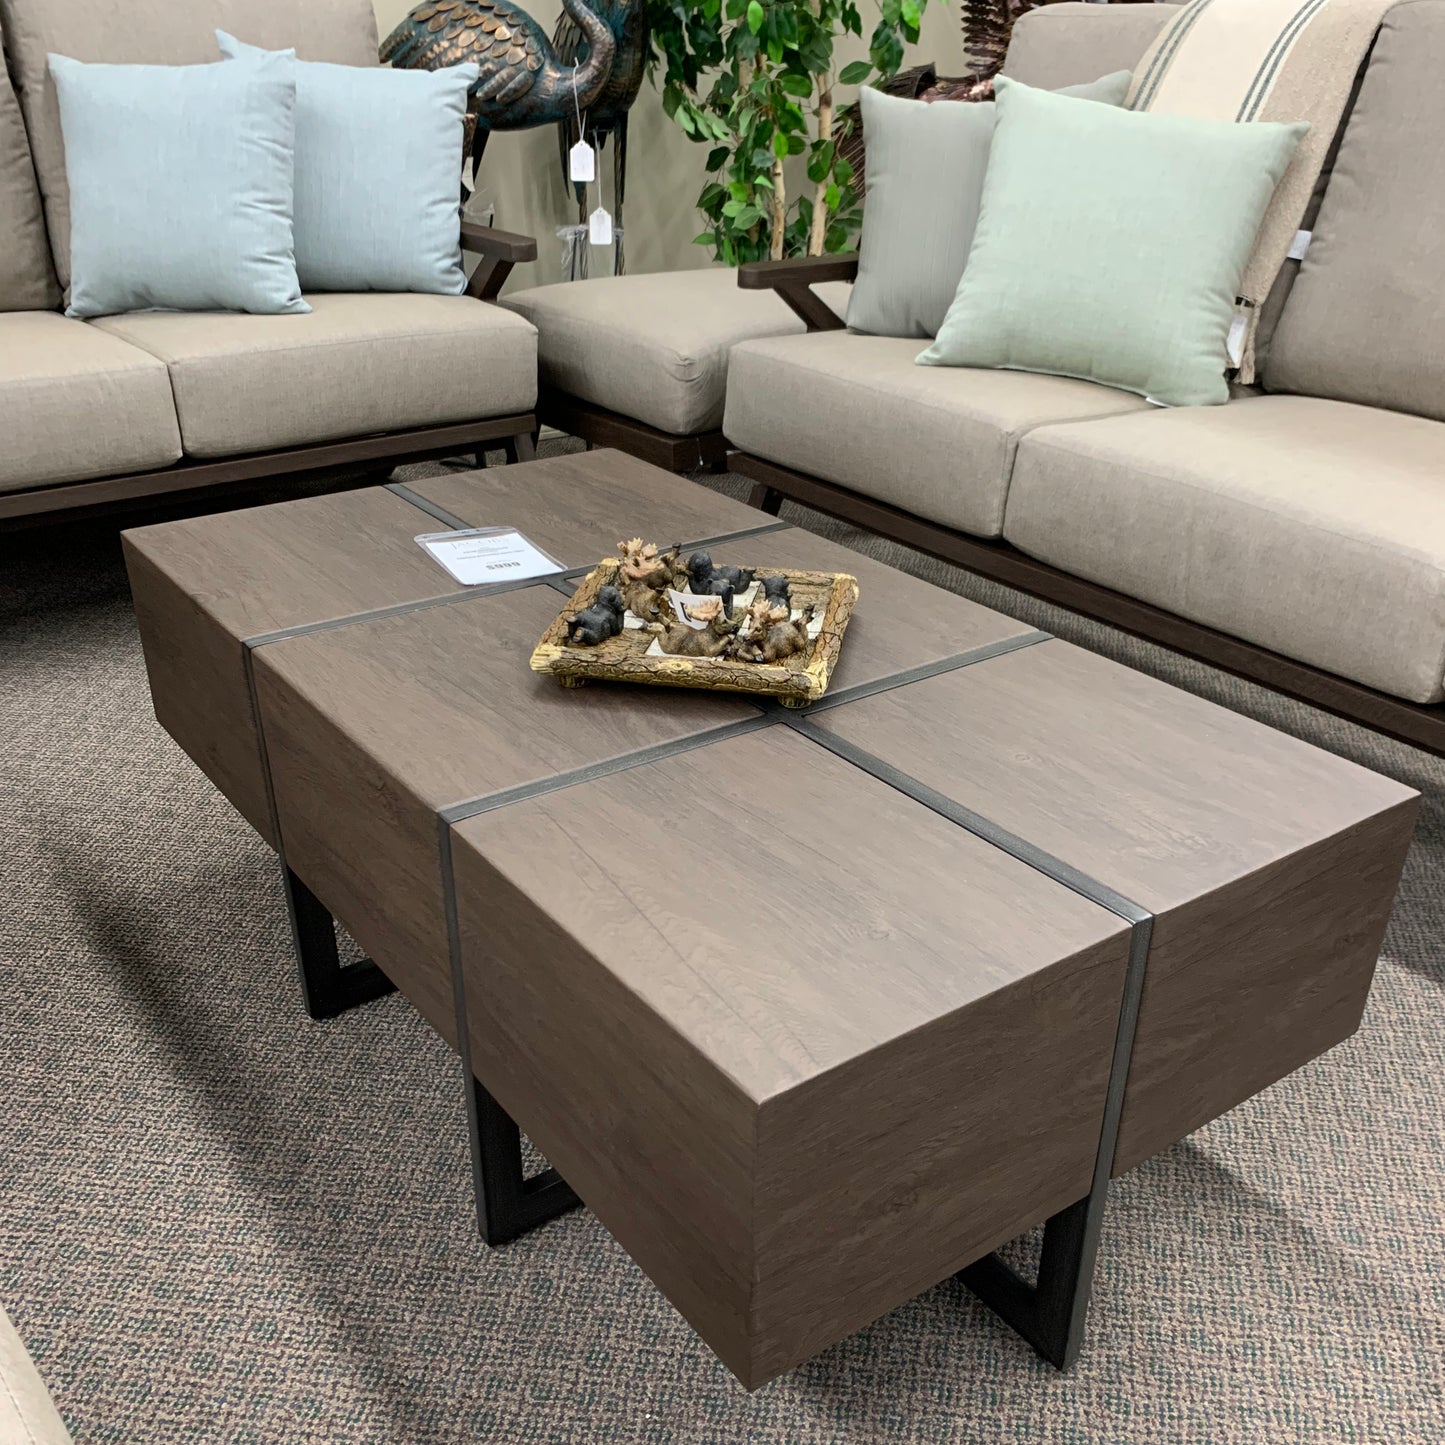 Shop Local Spokane Valley, WA for the best outdoor patio coffee table  from Patio Renaissance available at Jacobs Custom Living in Spokane Valley, WA 